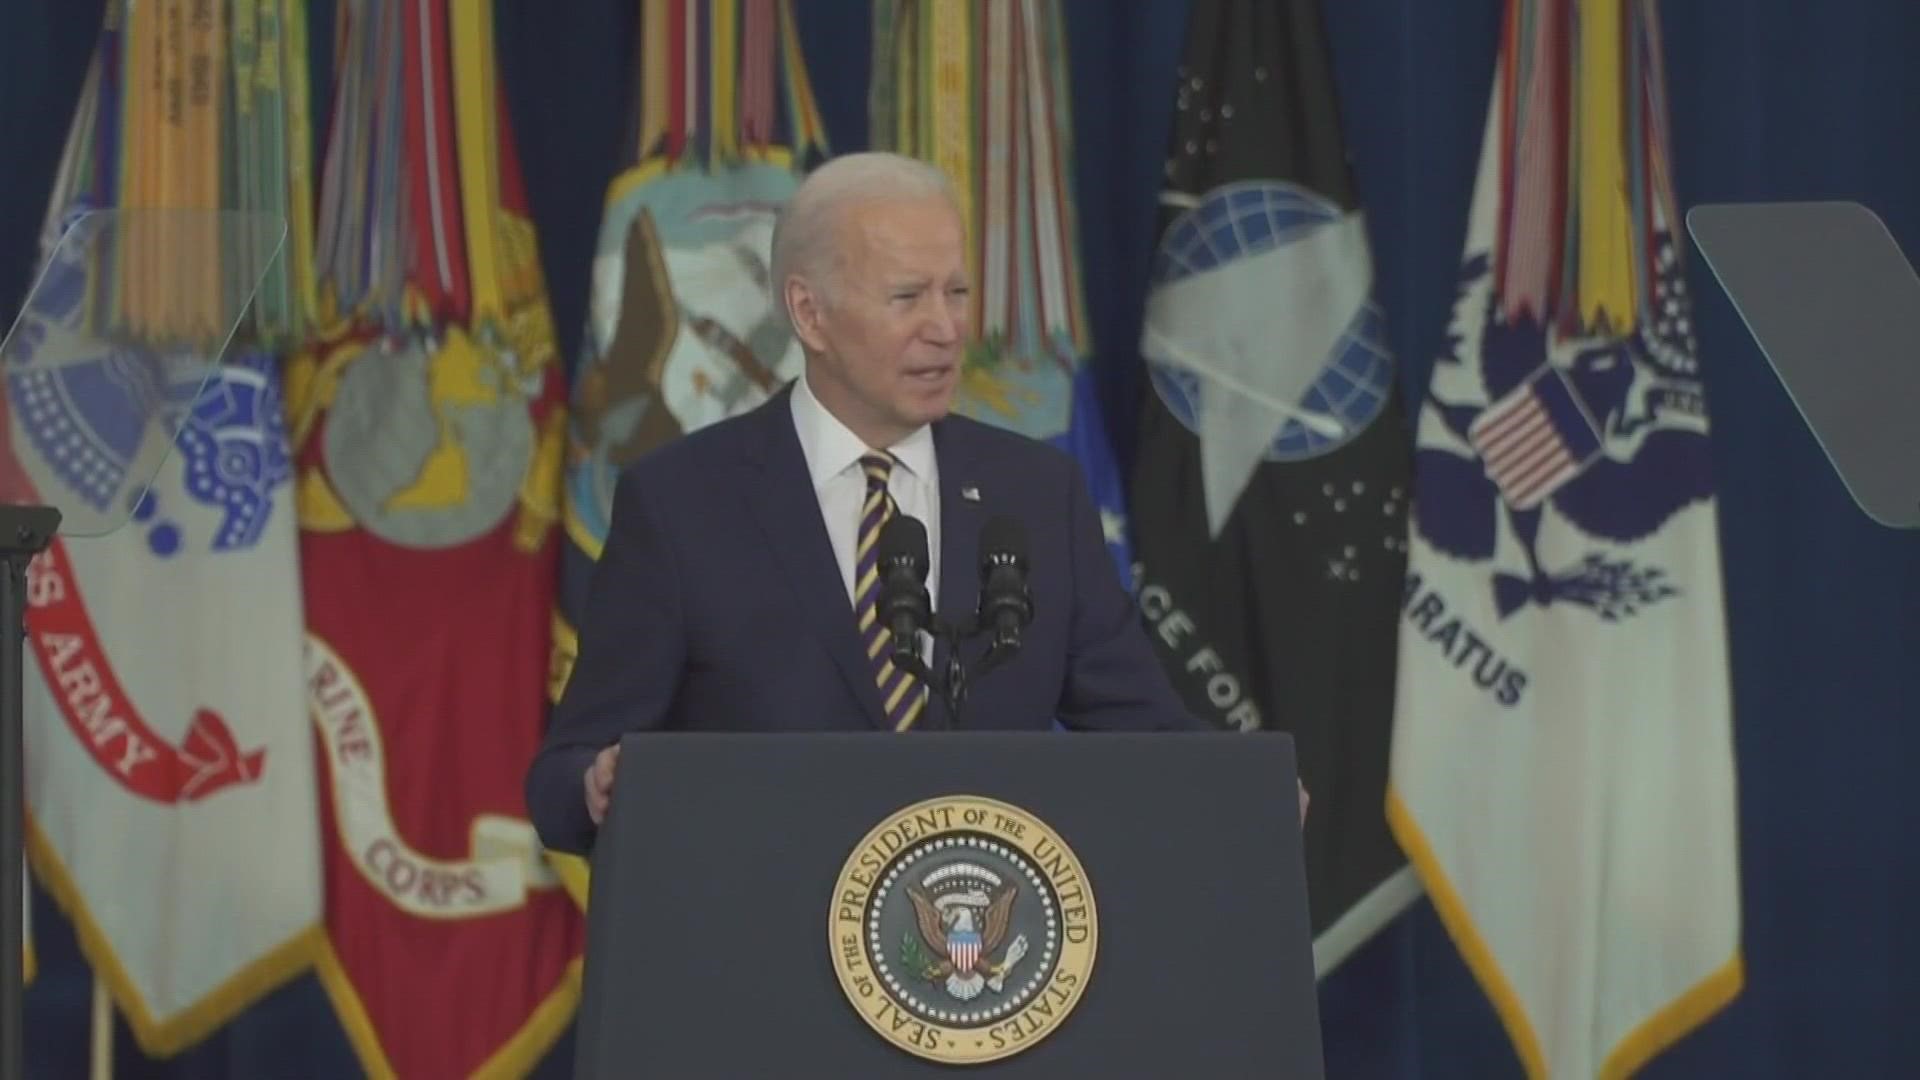 President Biden was in Fort Worth to speak about getting expanded health benefits for veterans affected by environmental exposures such as burn pits.